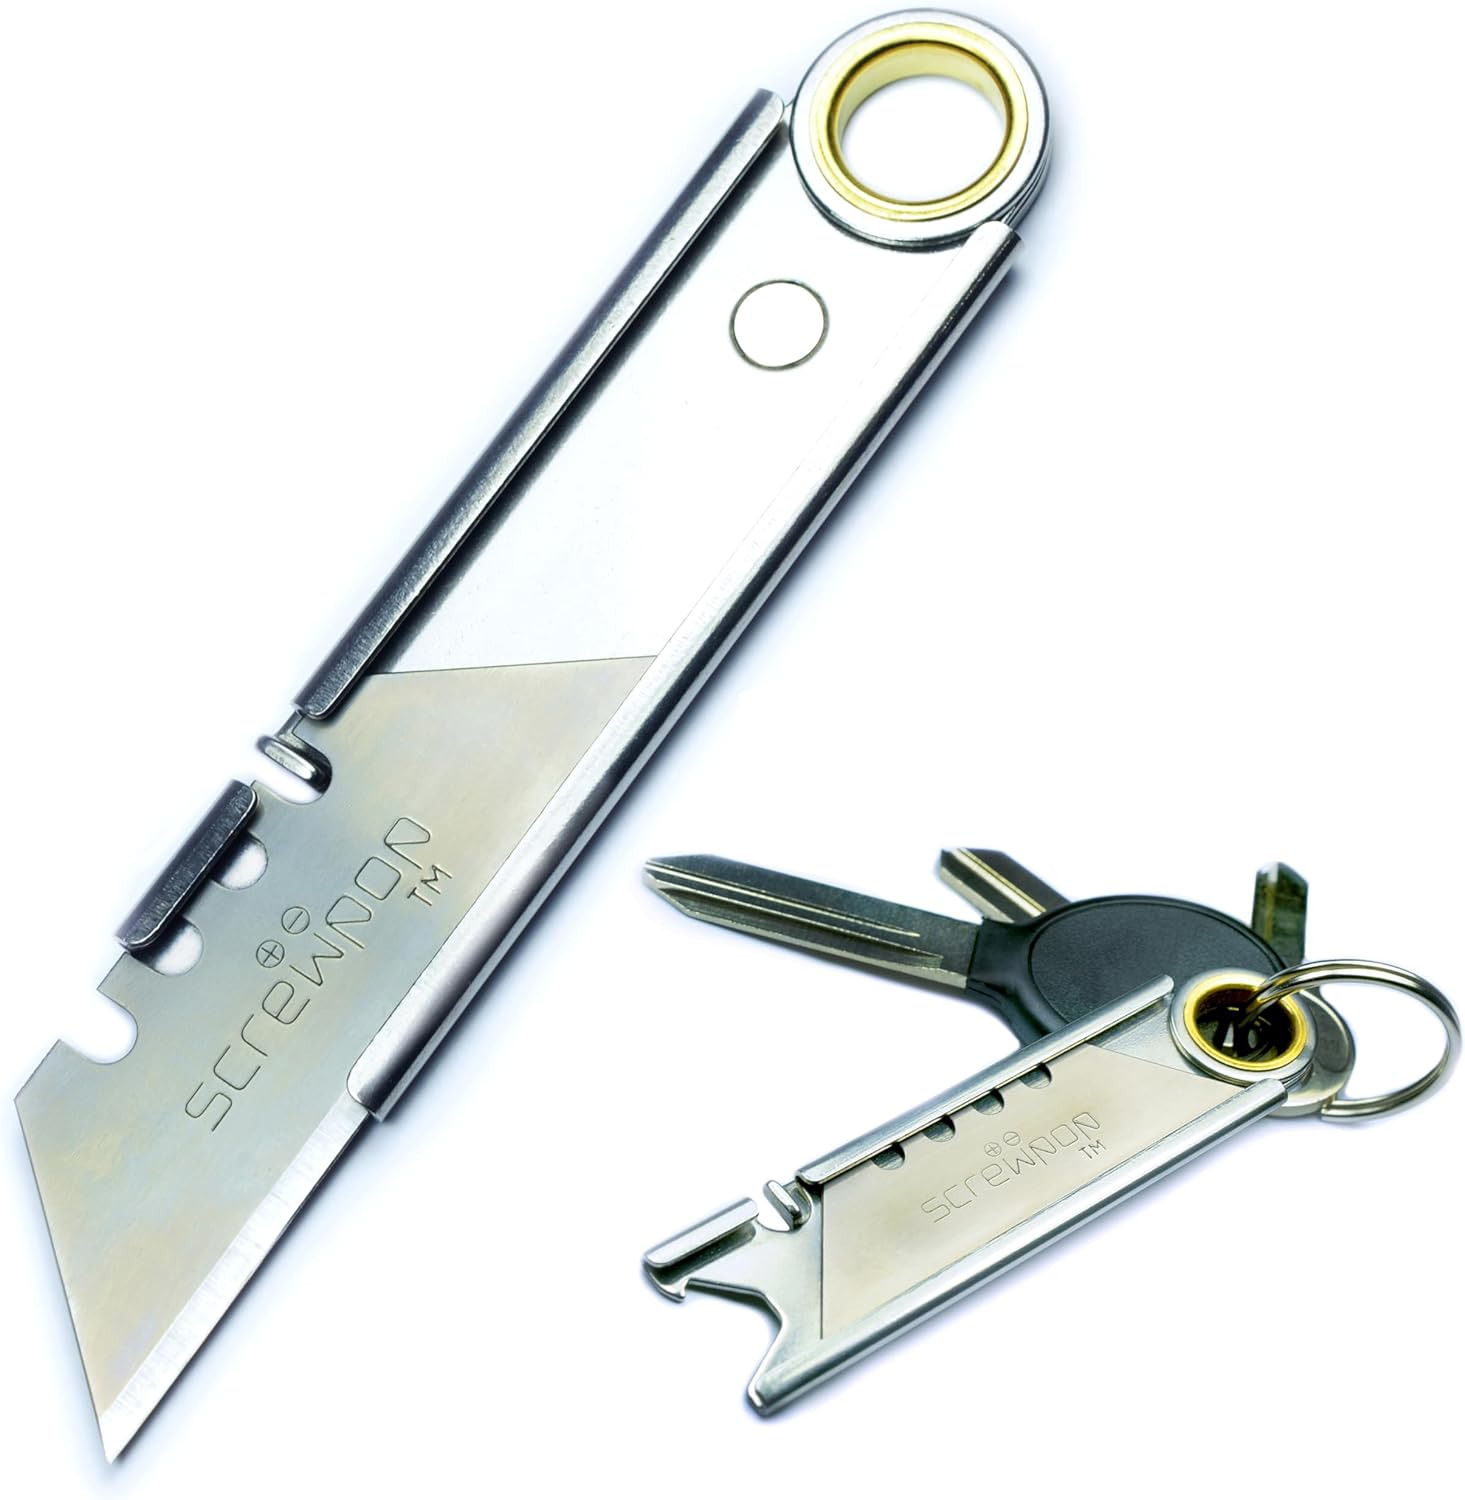 Ron'S Utility Pocket Knife 3.0 Keychain Carabiner Also Magnetizes Surfaces